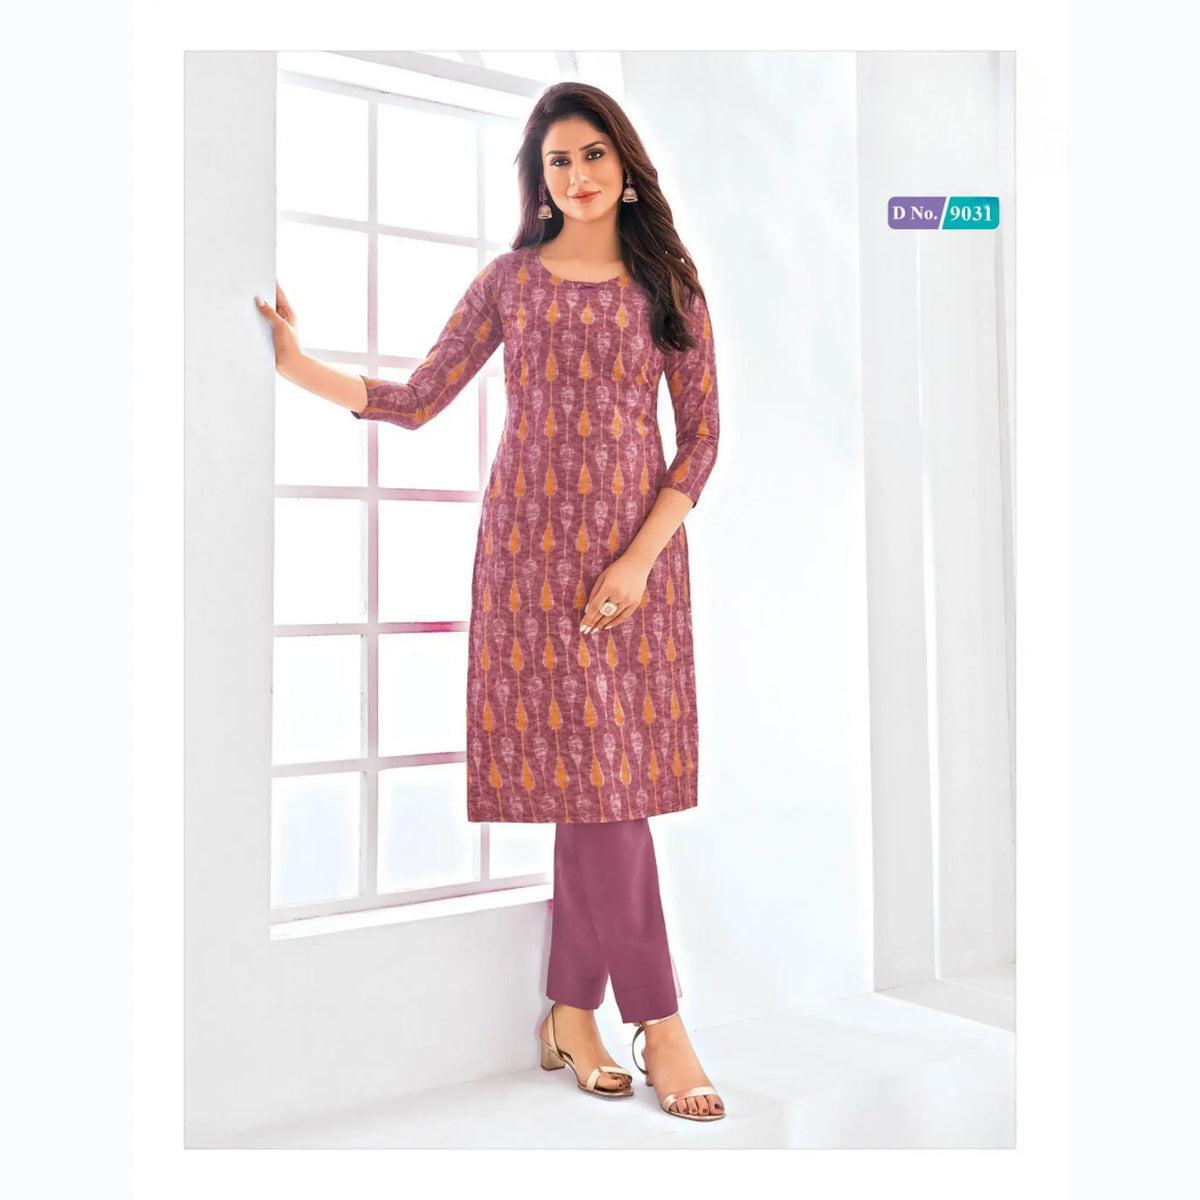 Ethnic Pinkish Brown Cotton Kurti with Print | Trendy and Chic